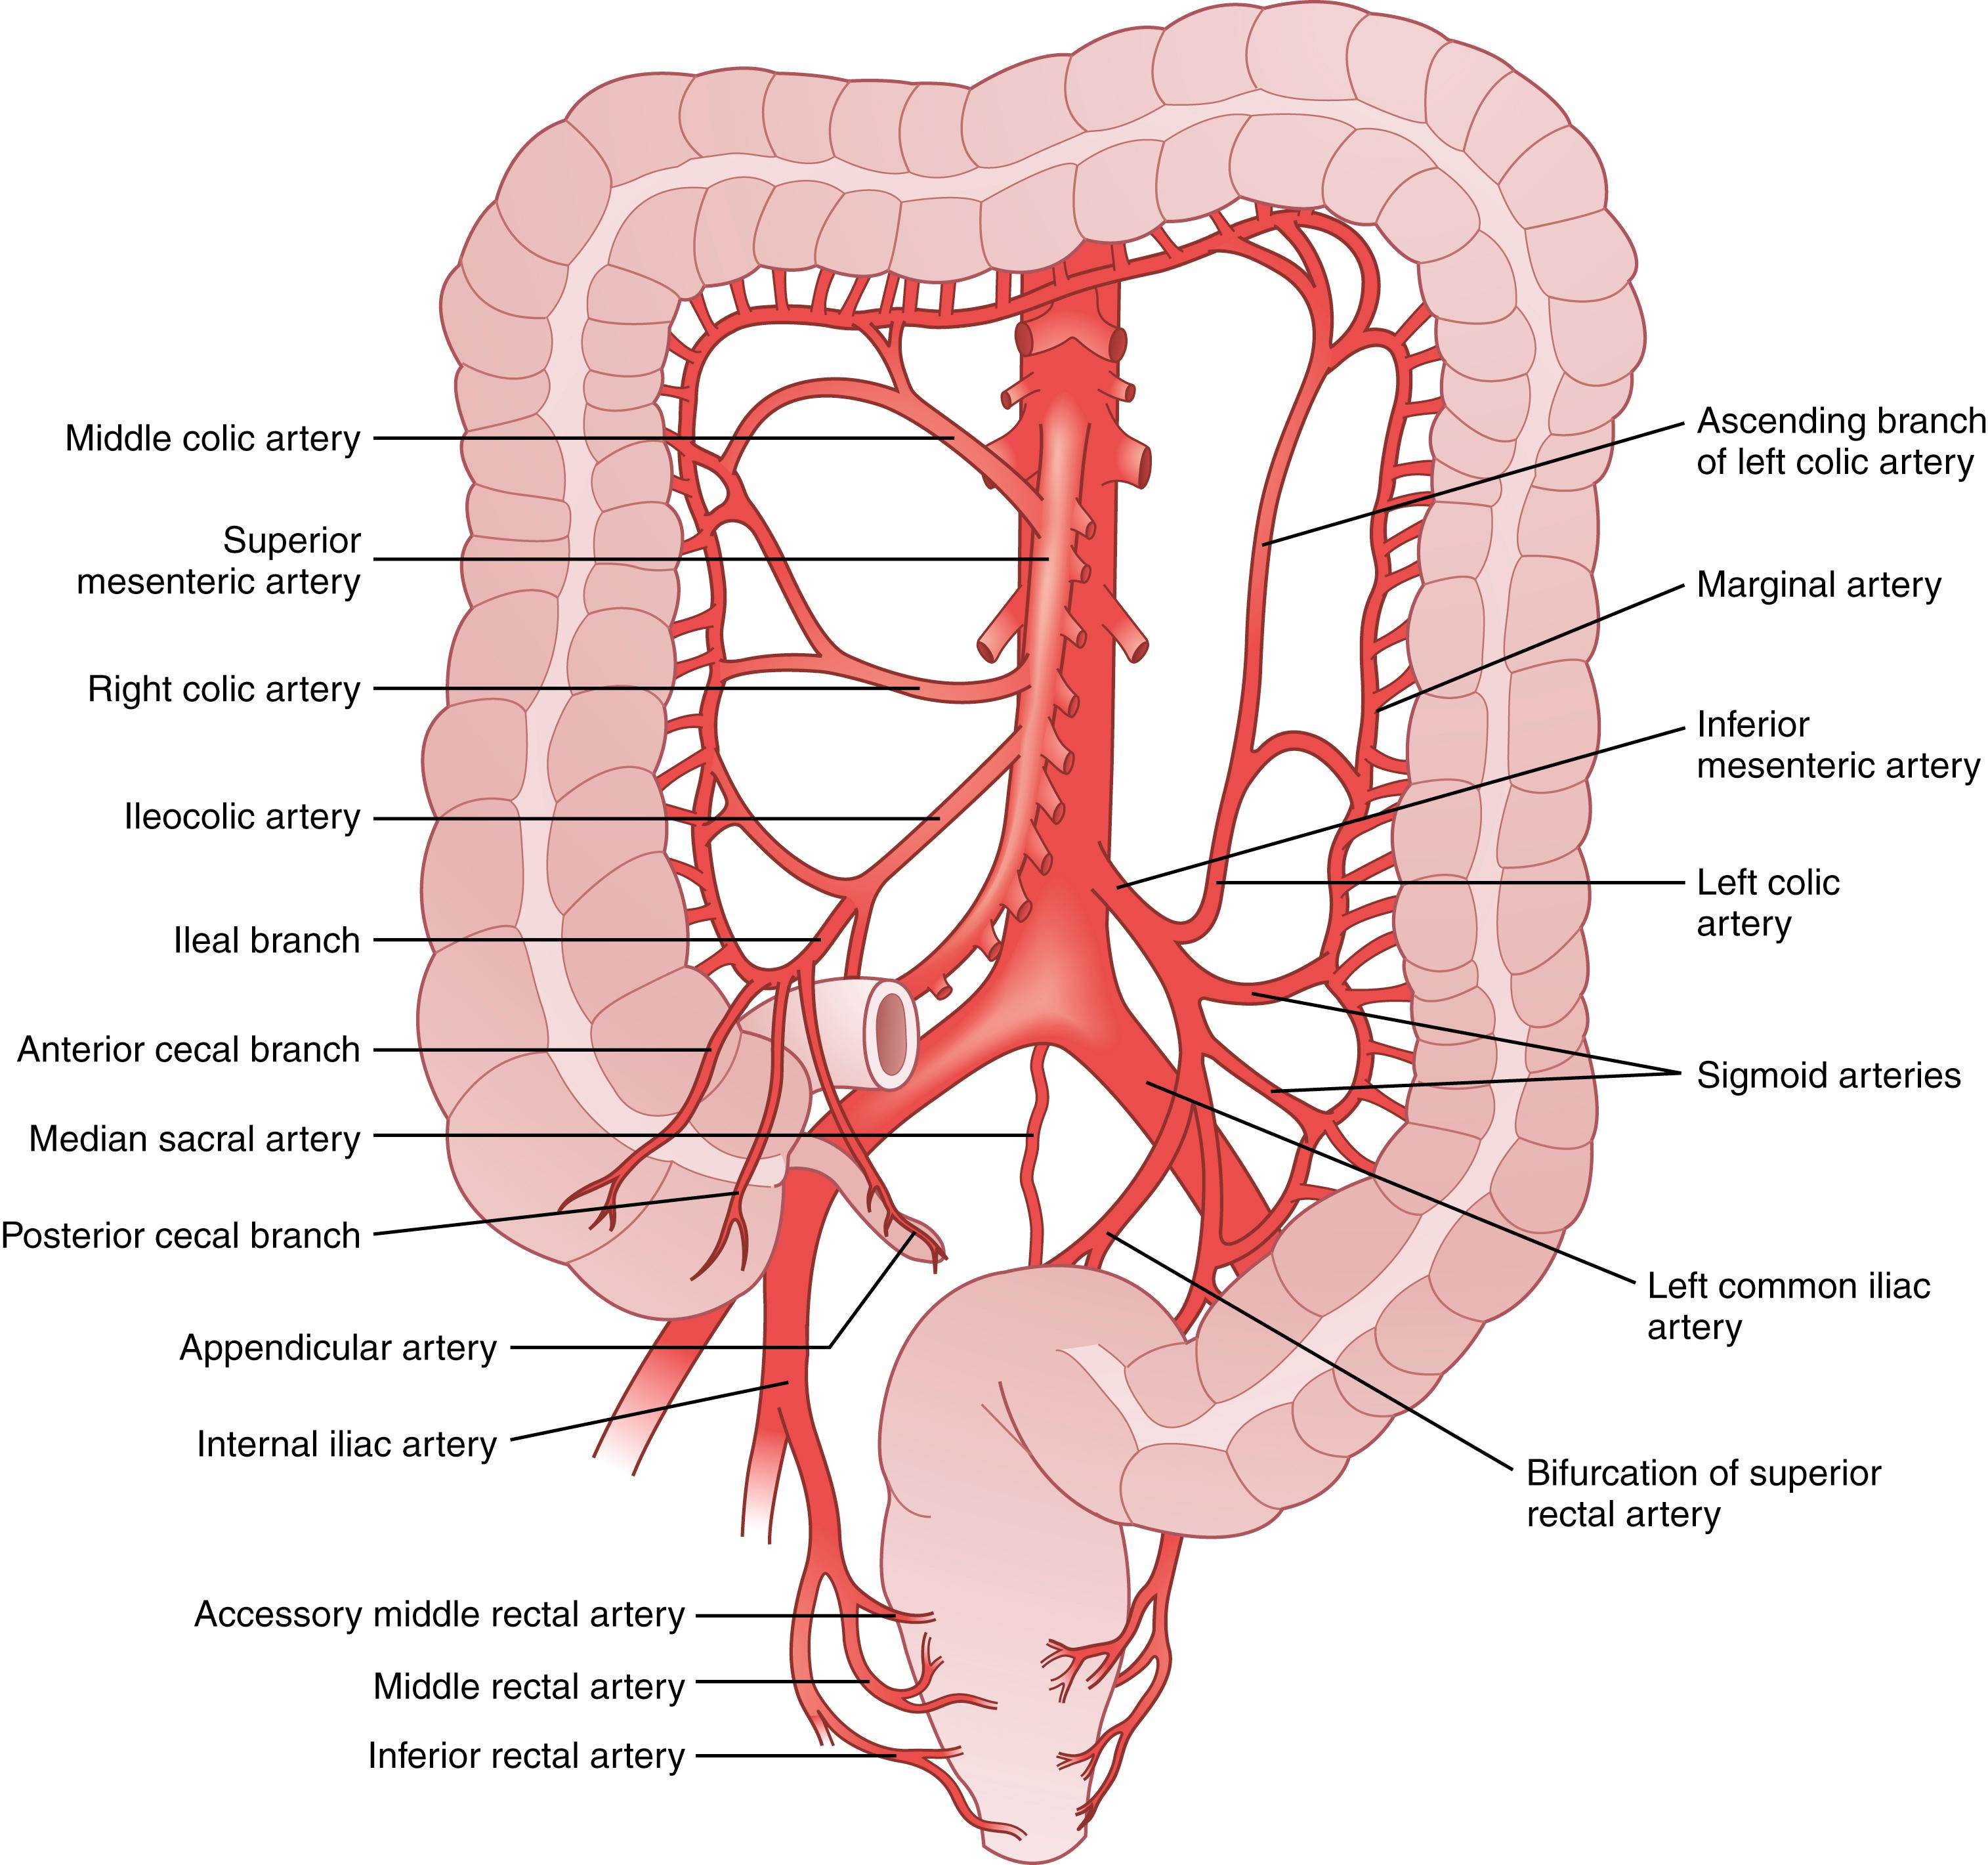 Fig. 52.8, The arterial blood supply to the colon is from the superior and inferior mesenteric arteries.